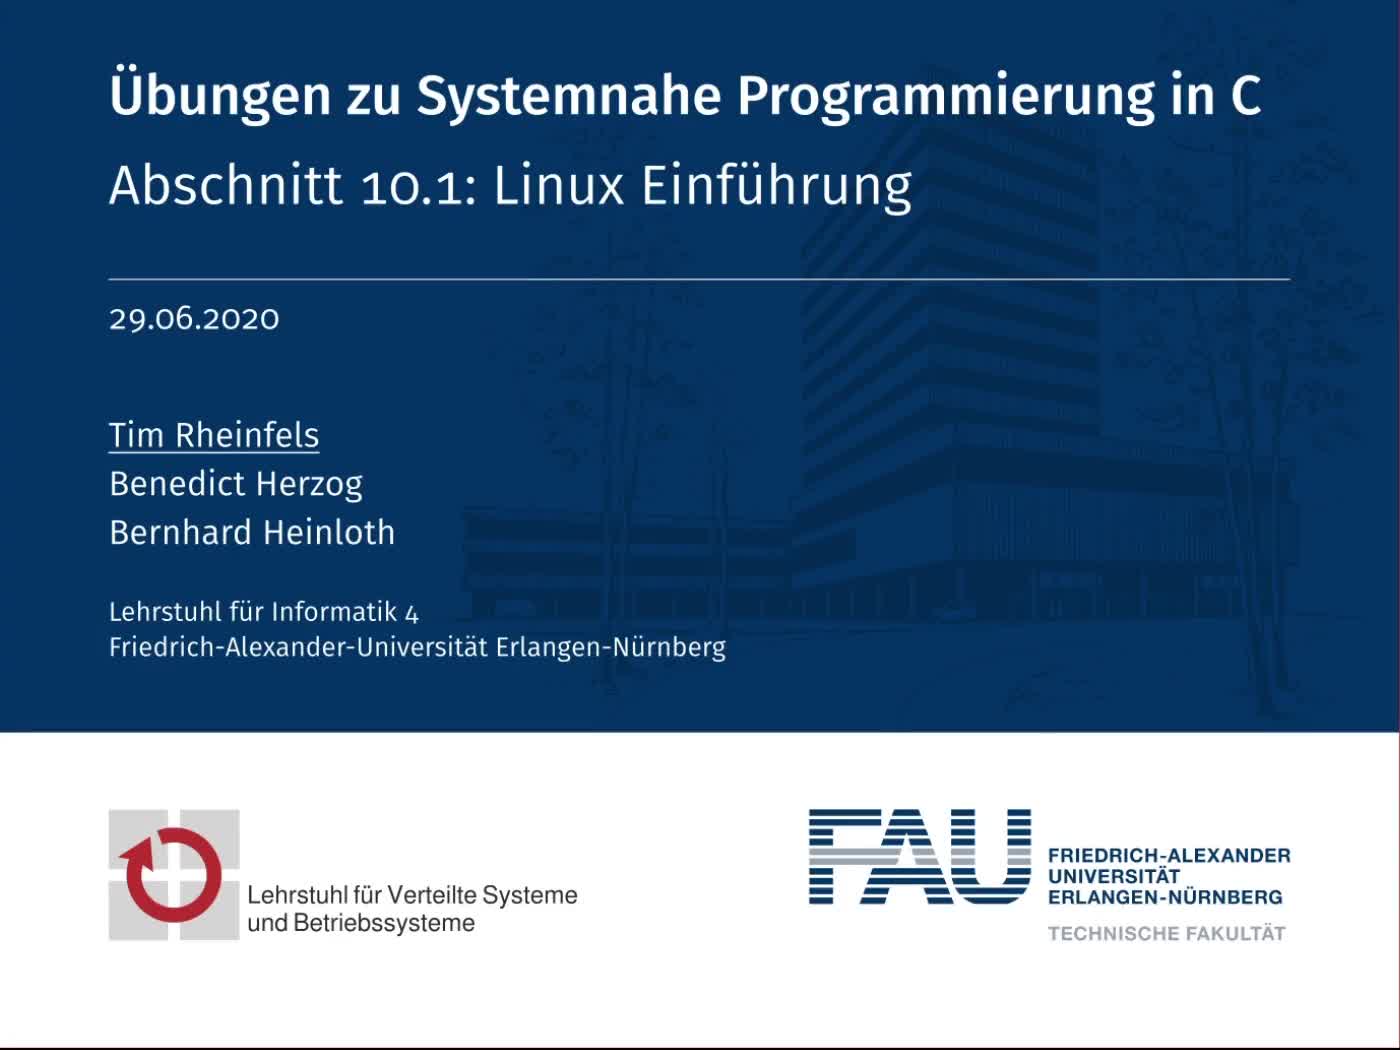 10.1: Linux Einführung preview image